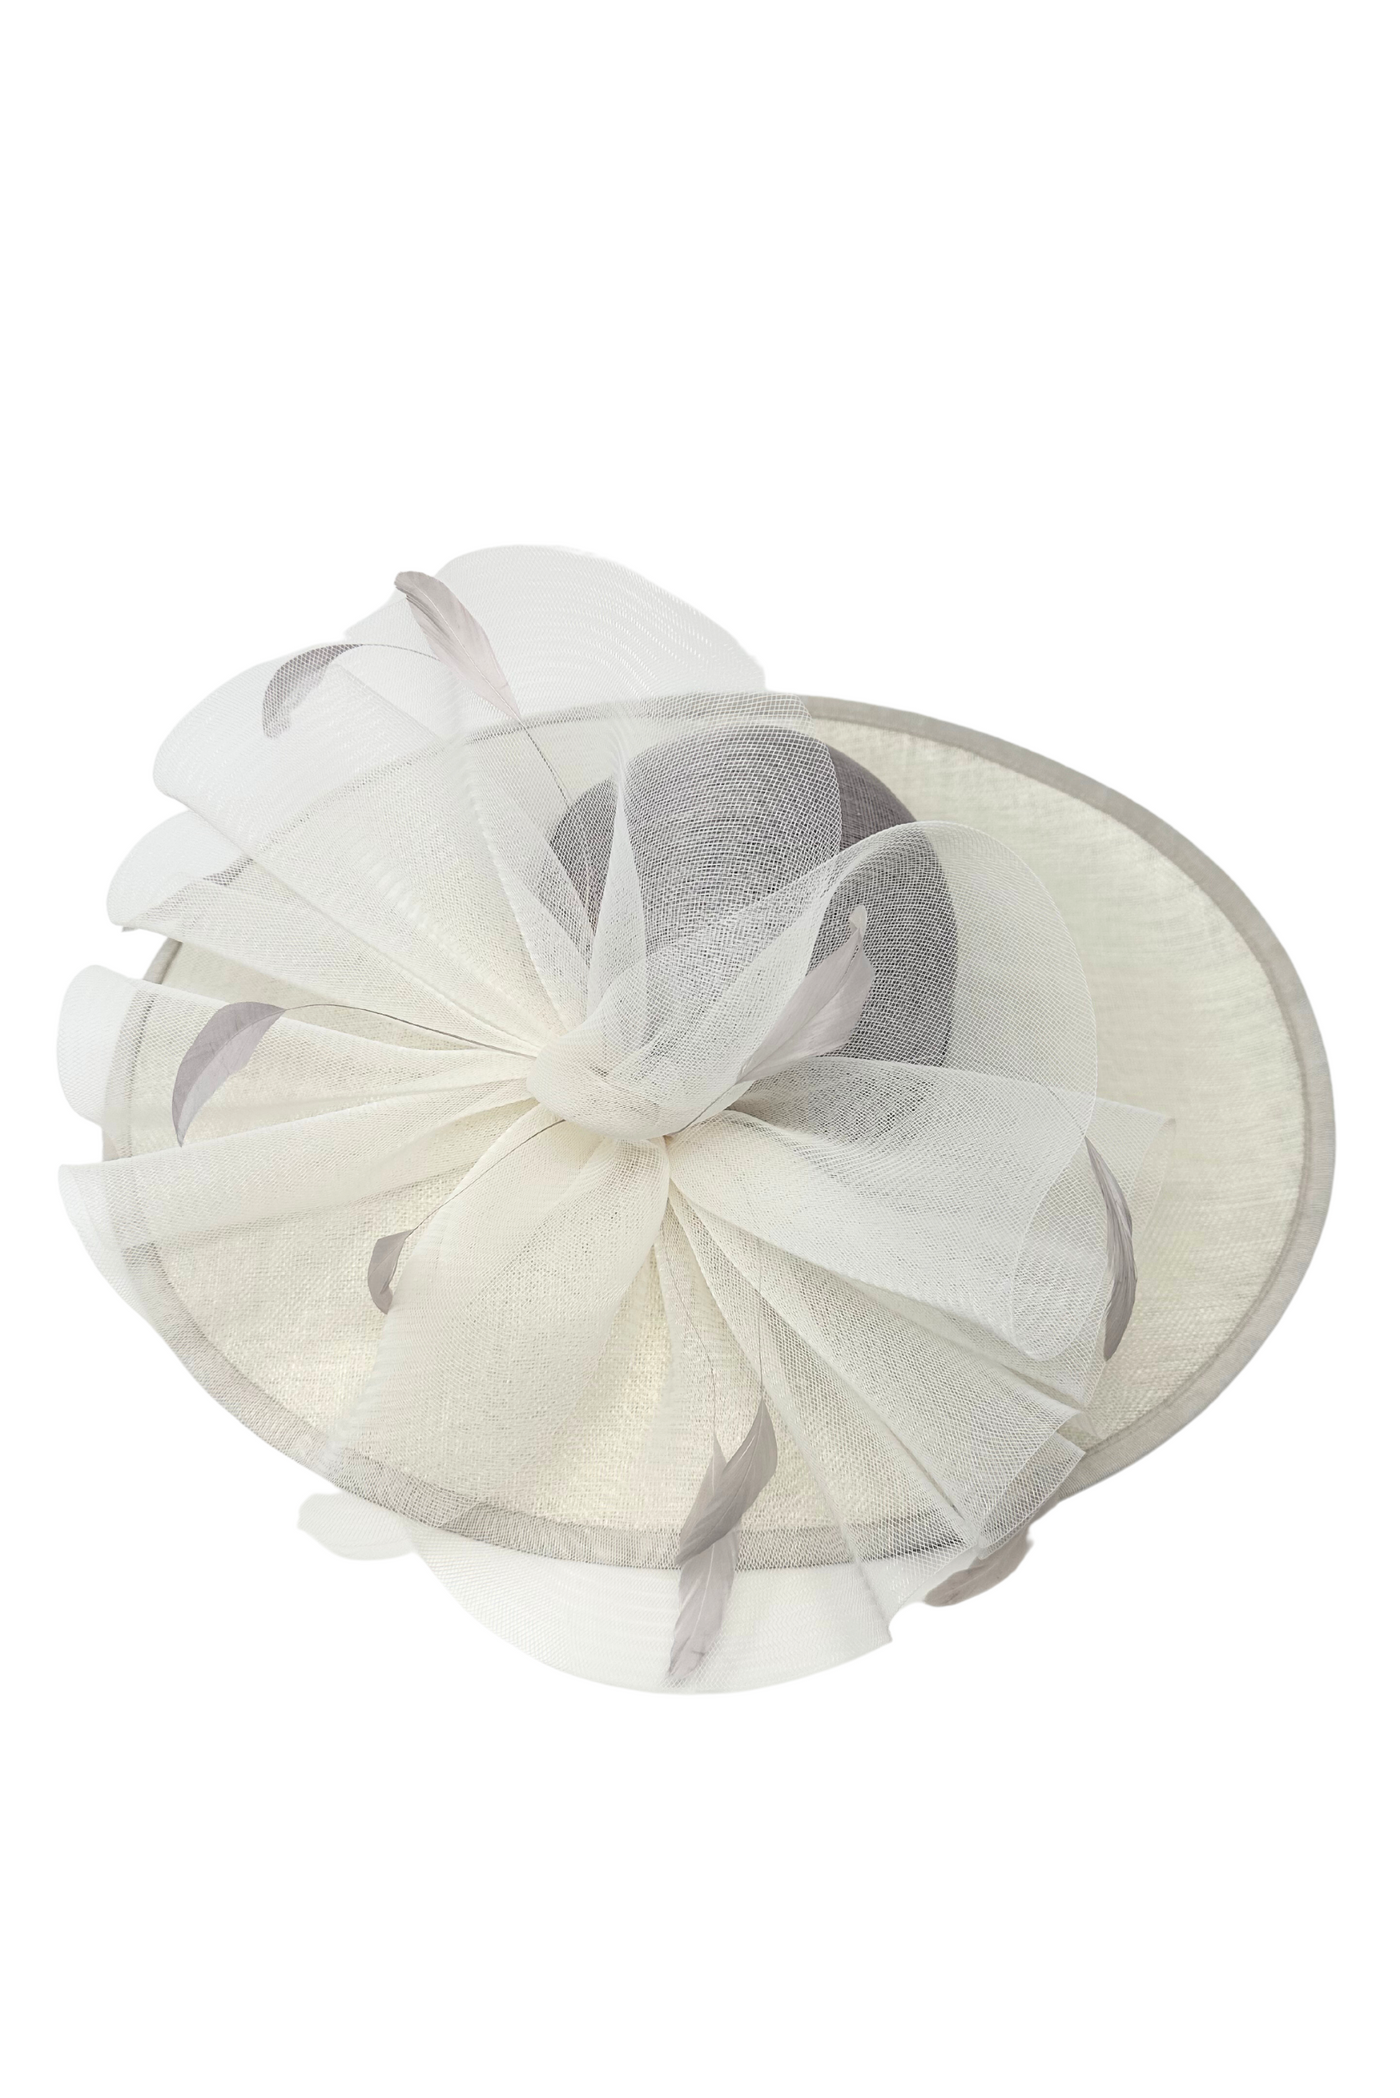 Taupe And Ivory Fascinator Hat Headpiece With Bow Detail